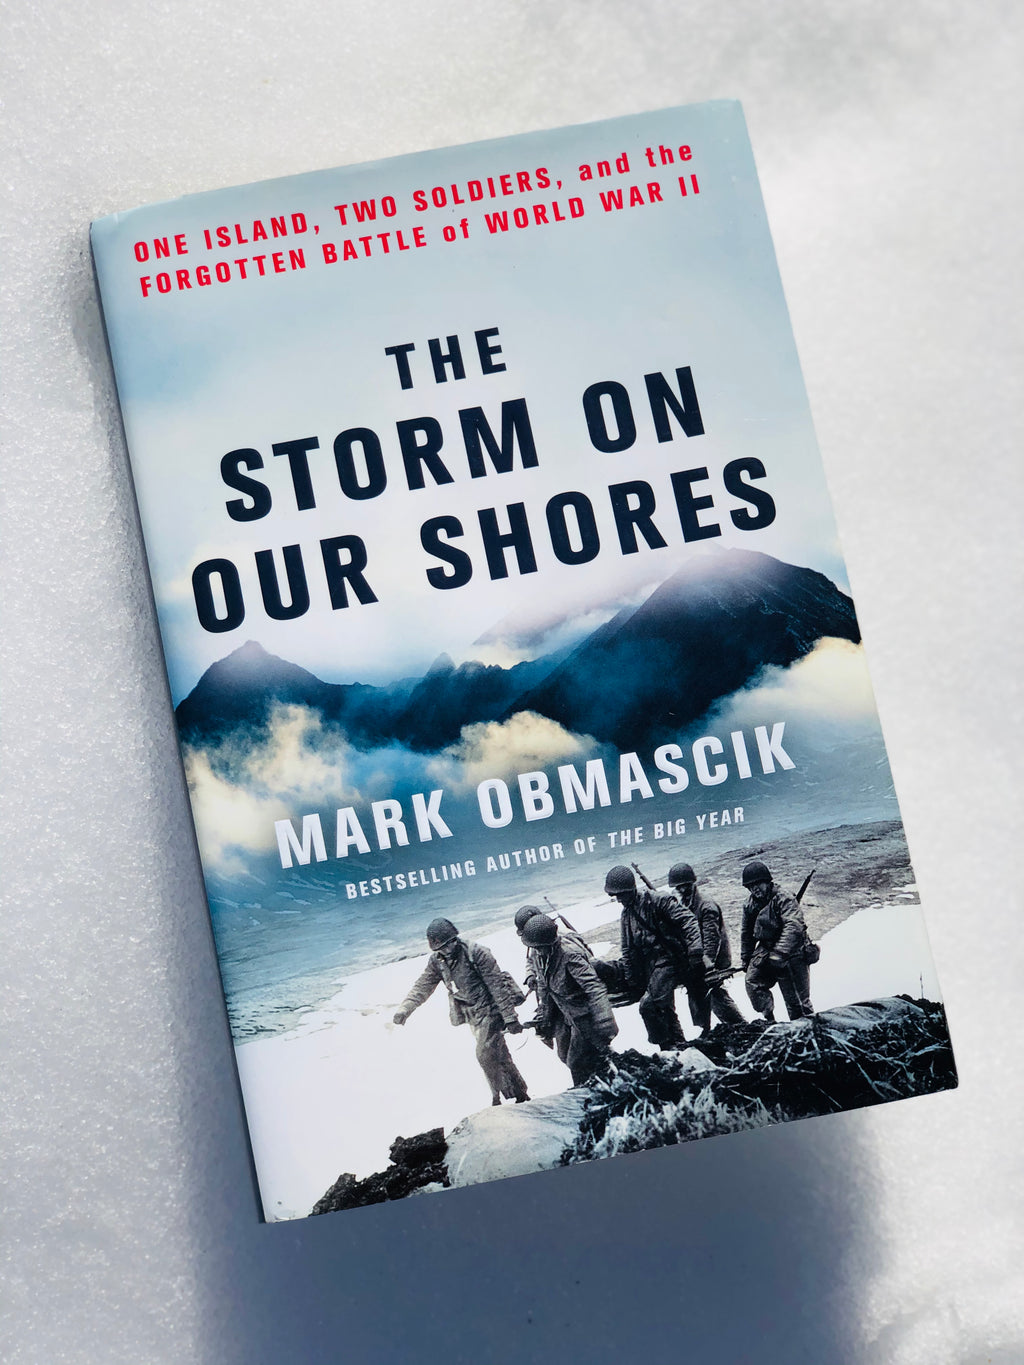 The Storm on Our Shores- By Mark Obmascik